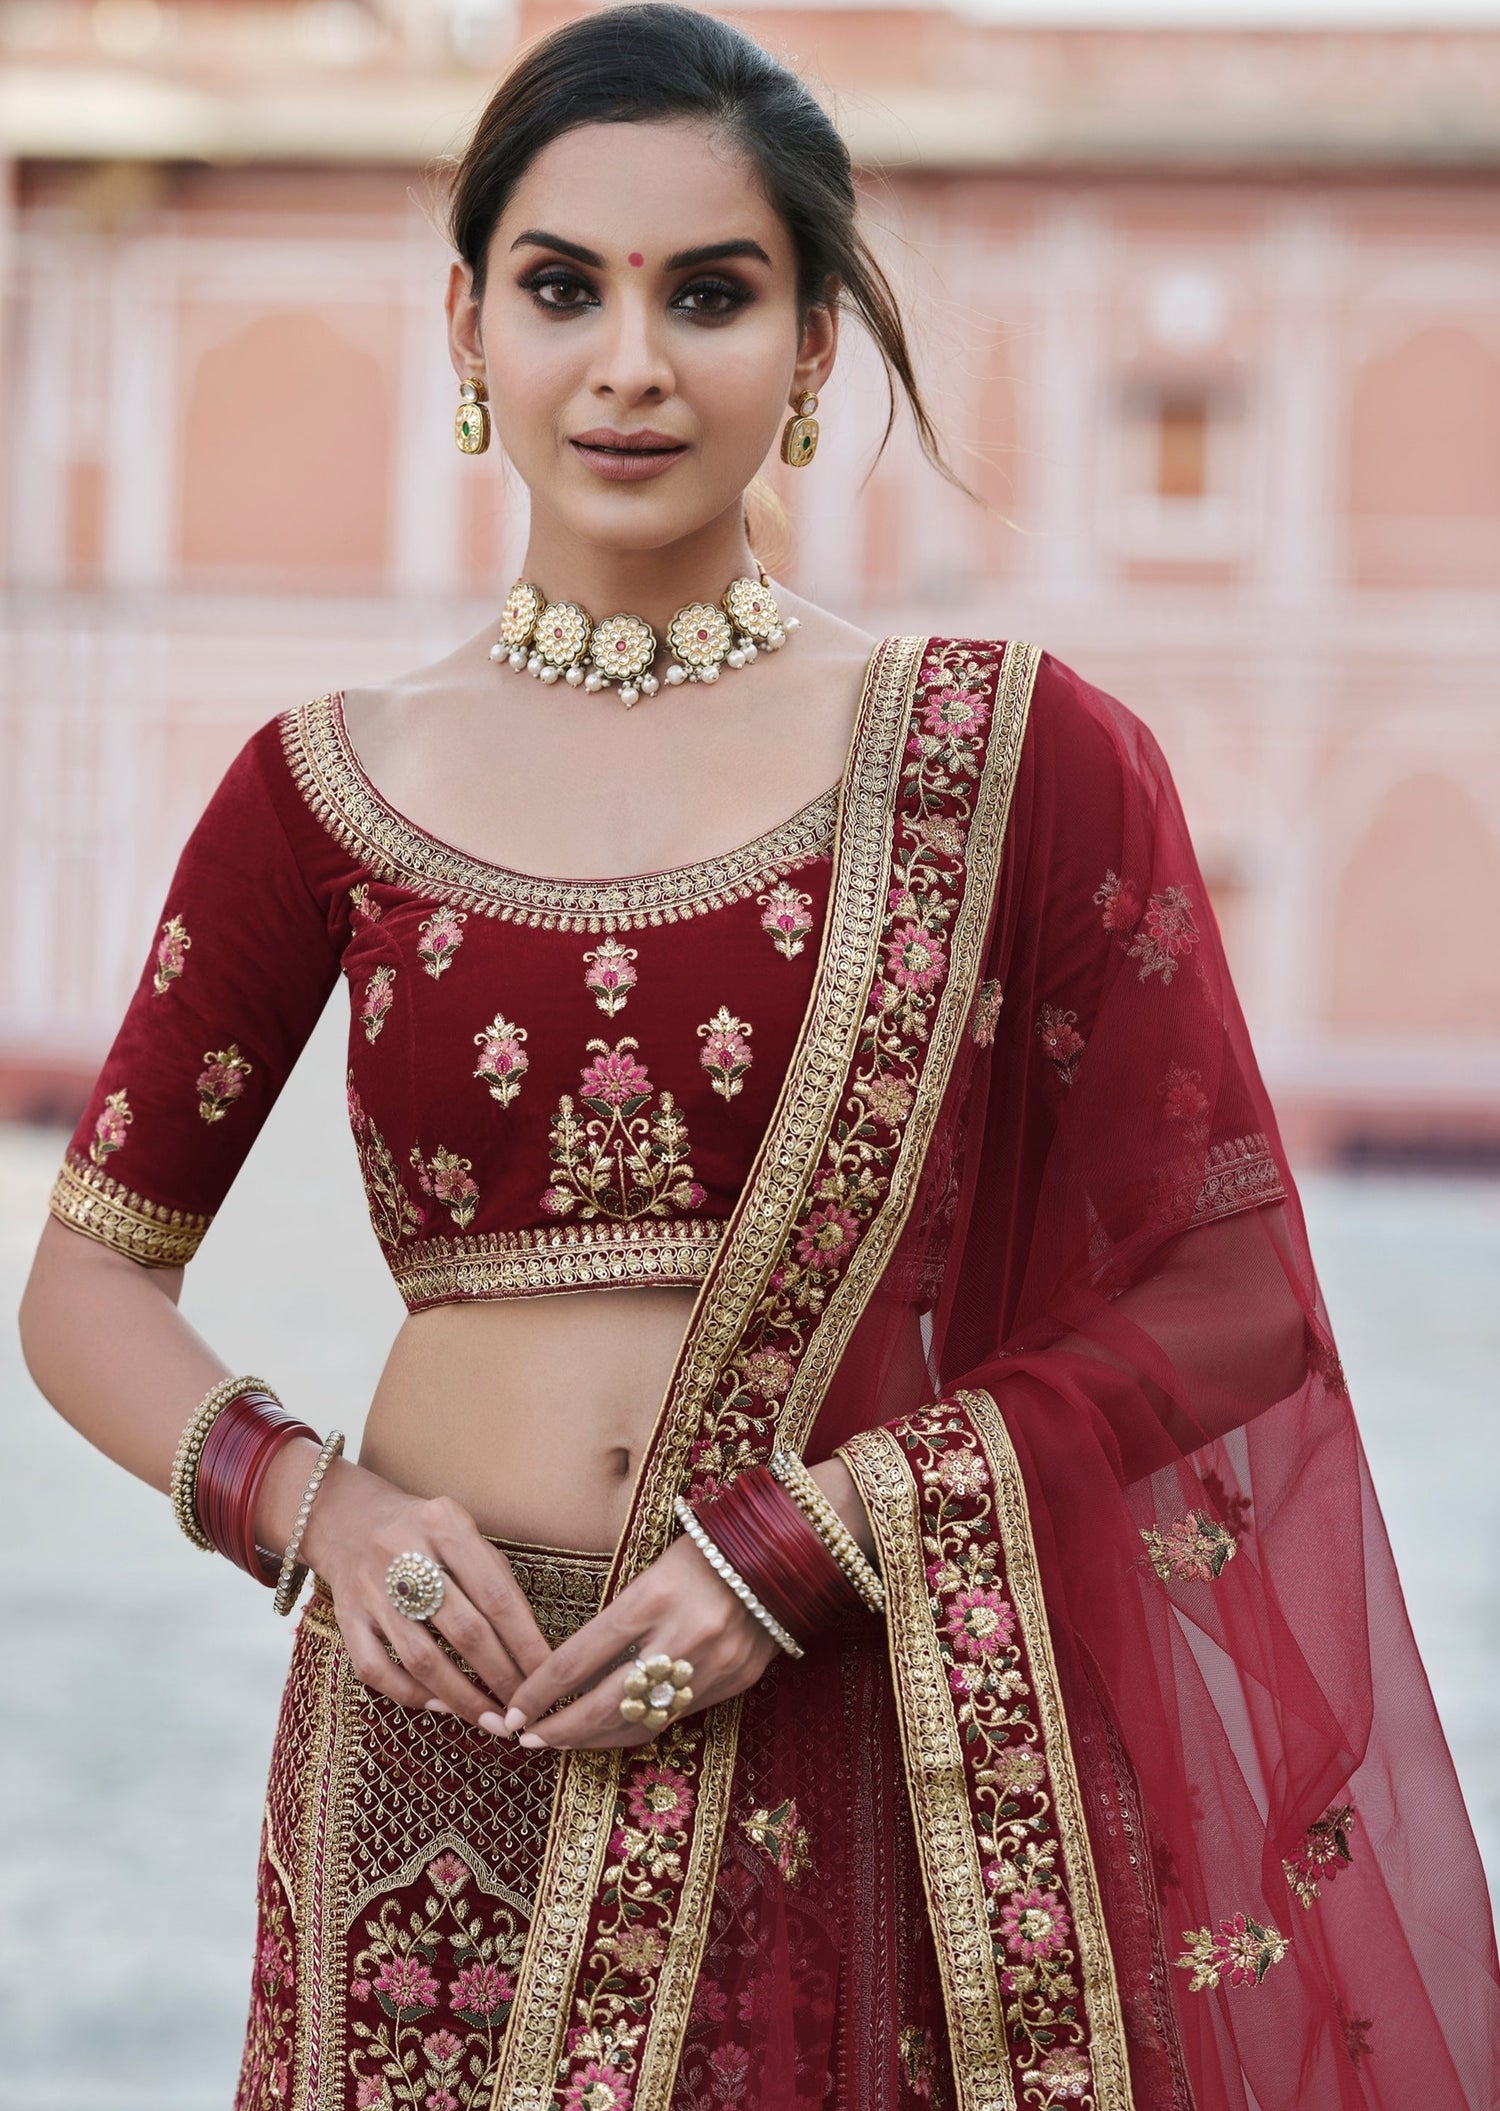 MAROON LEHENGA SET WITH ALL OVER 'BAADLA' SILVER EMBROIDERY PAIRED WITH A  MATCHING DUPATTA AND ALL OVER SILVER EMBELLISHMENTS. - Seasons India